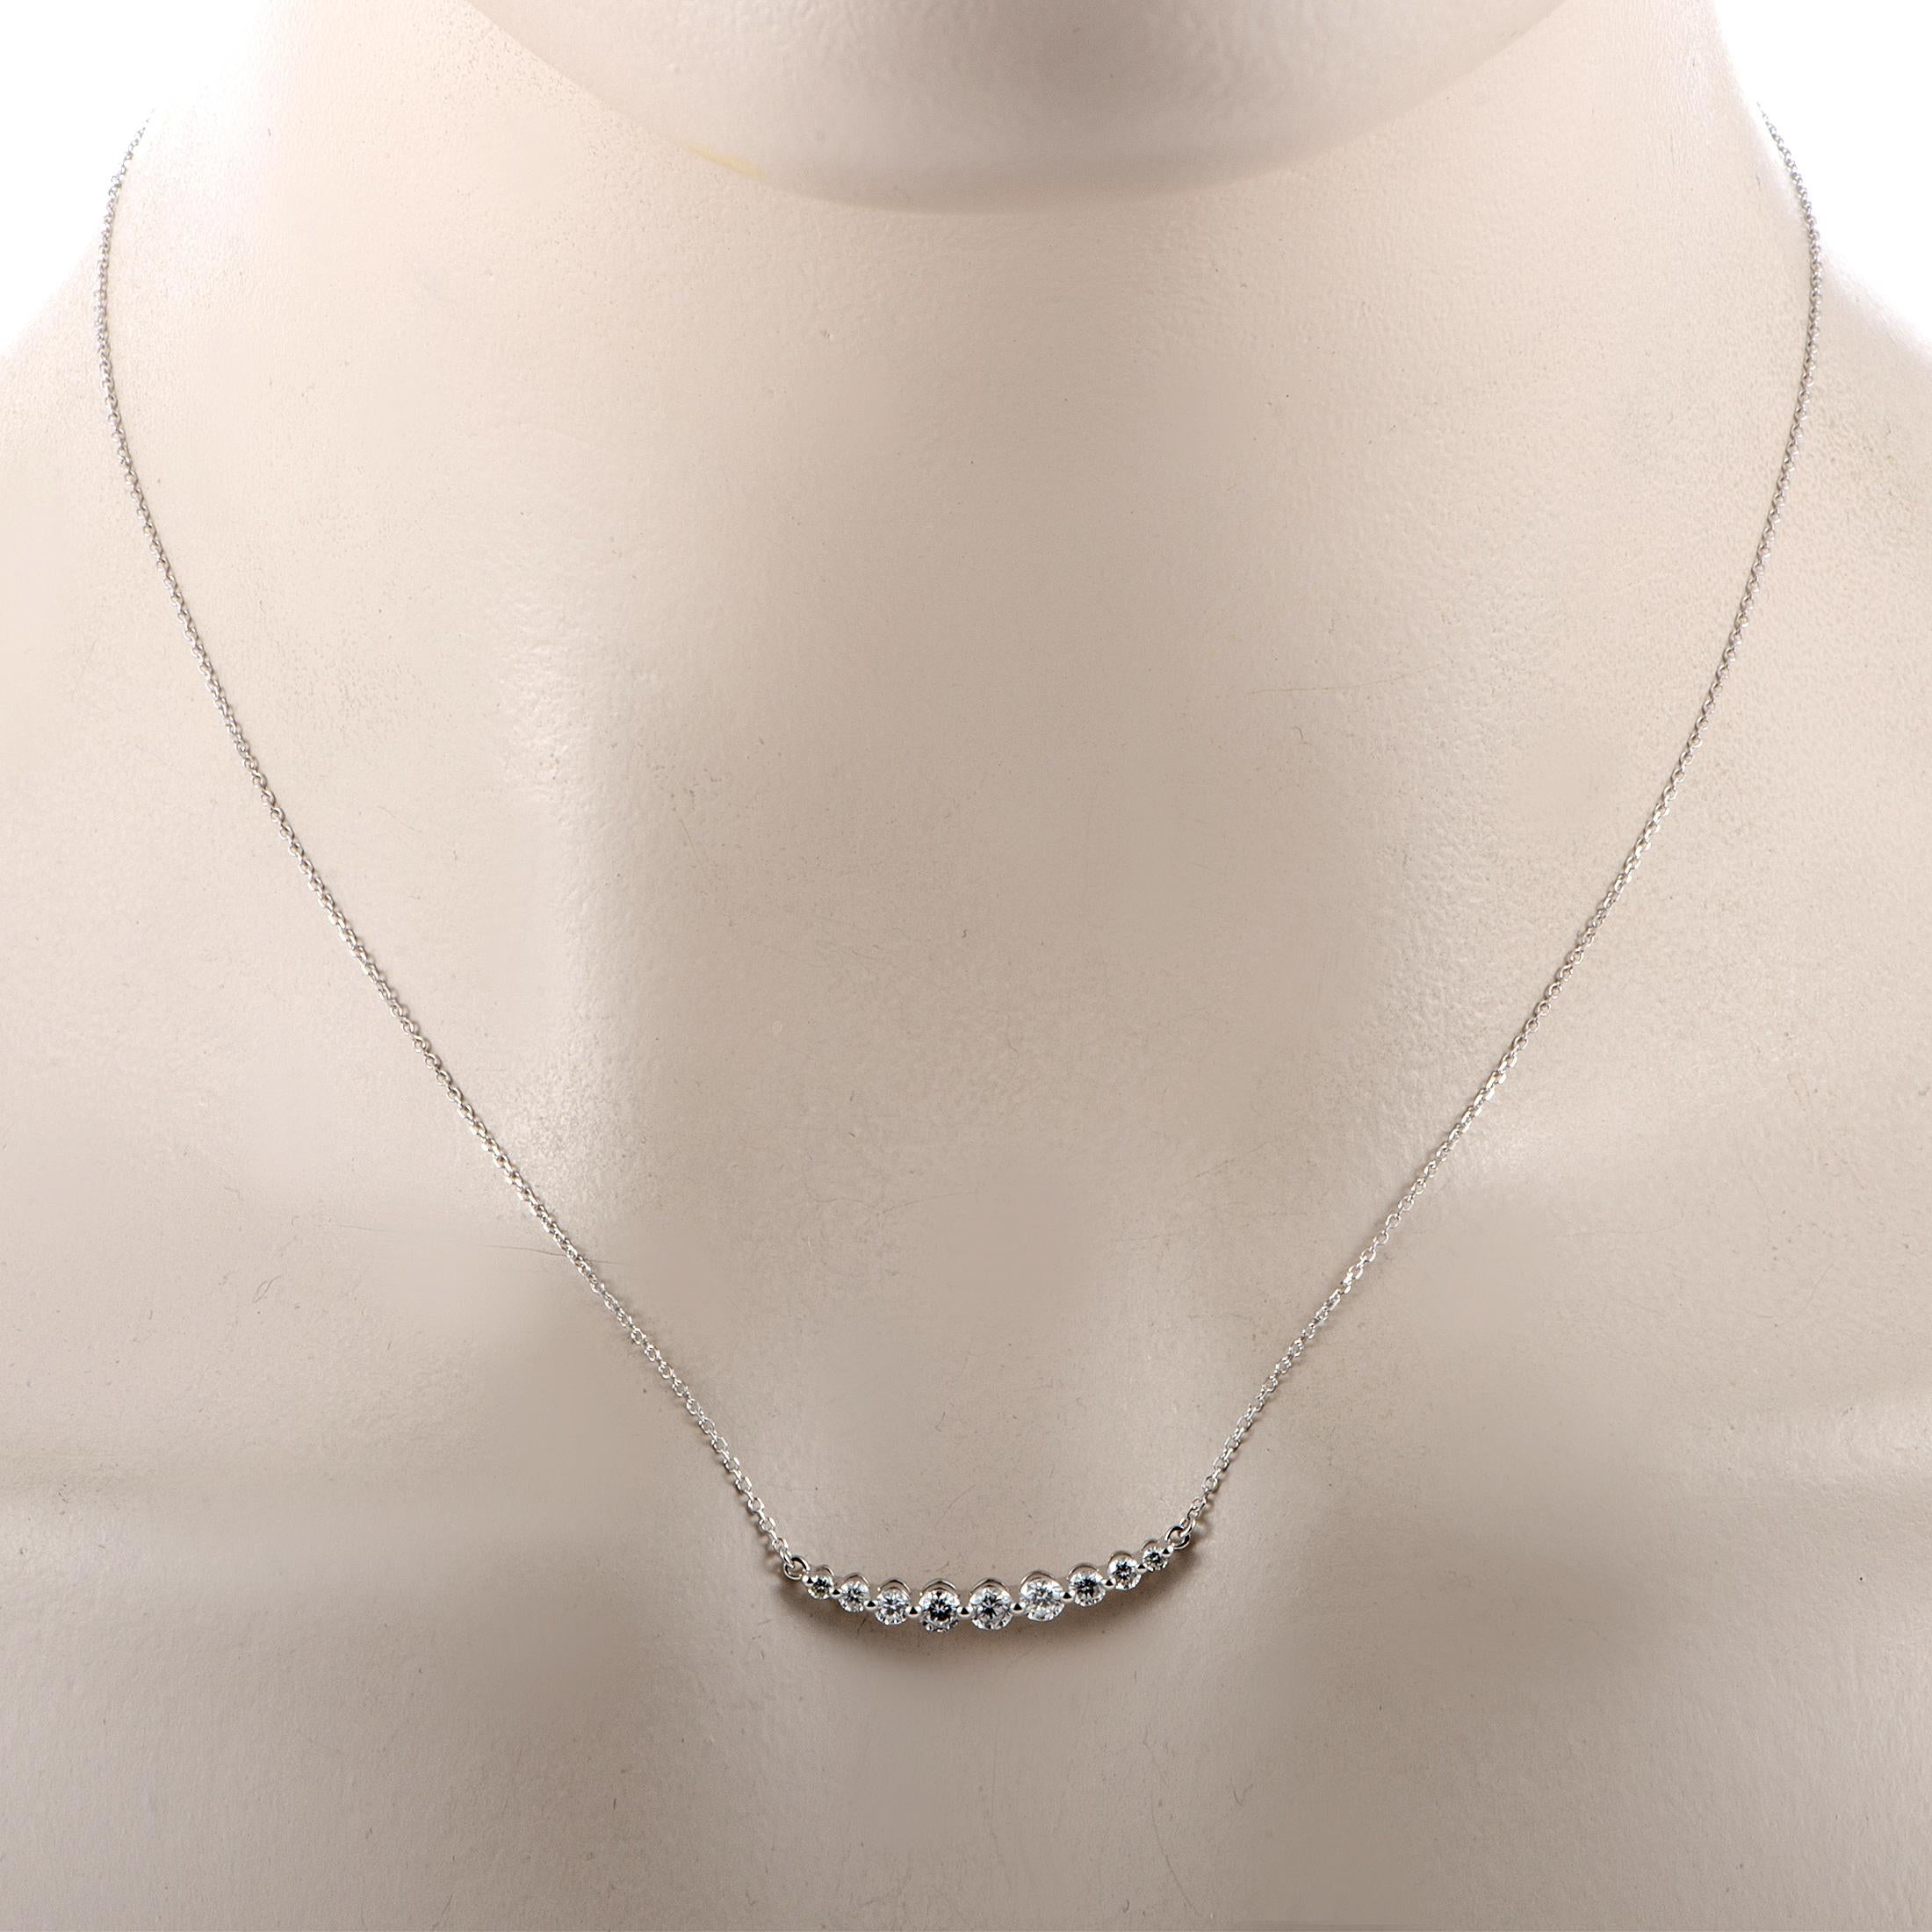 This LB Exclusive necklace is made out of 18K white gold and diamonds that total 0.50 carats. The necklace weighs 2.1 grams and boasts a 16” chain and a pendant that measures 0.15” in length and 1” in width.

Offered in brand new condition, this